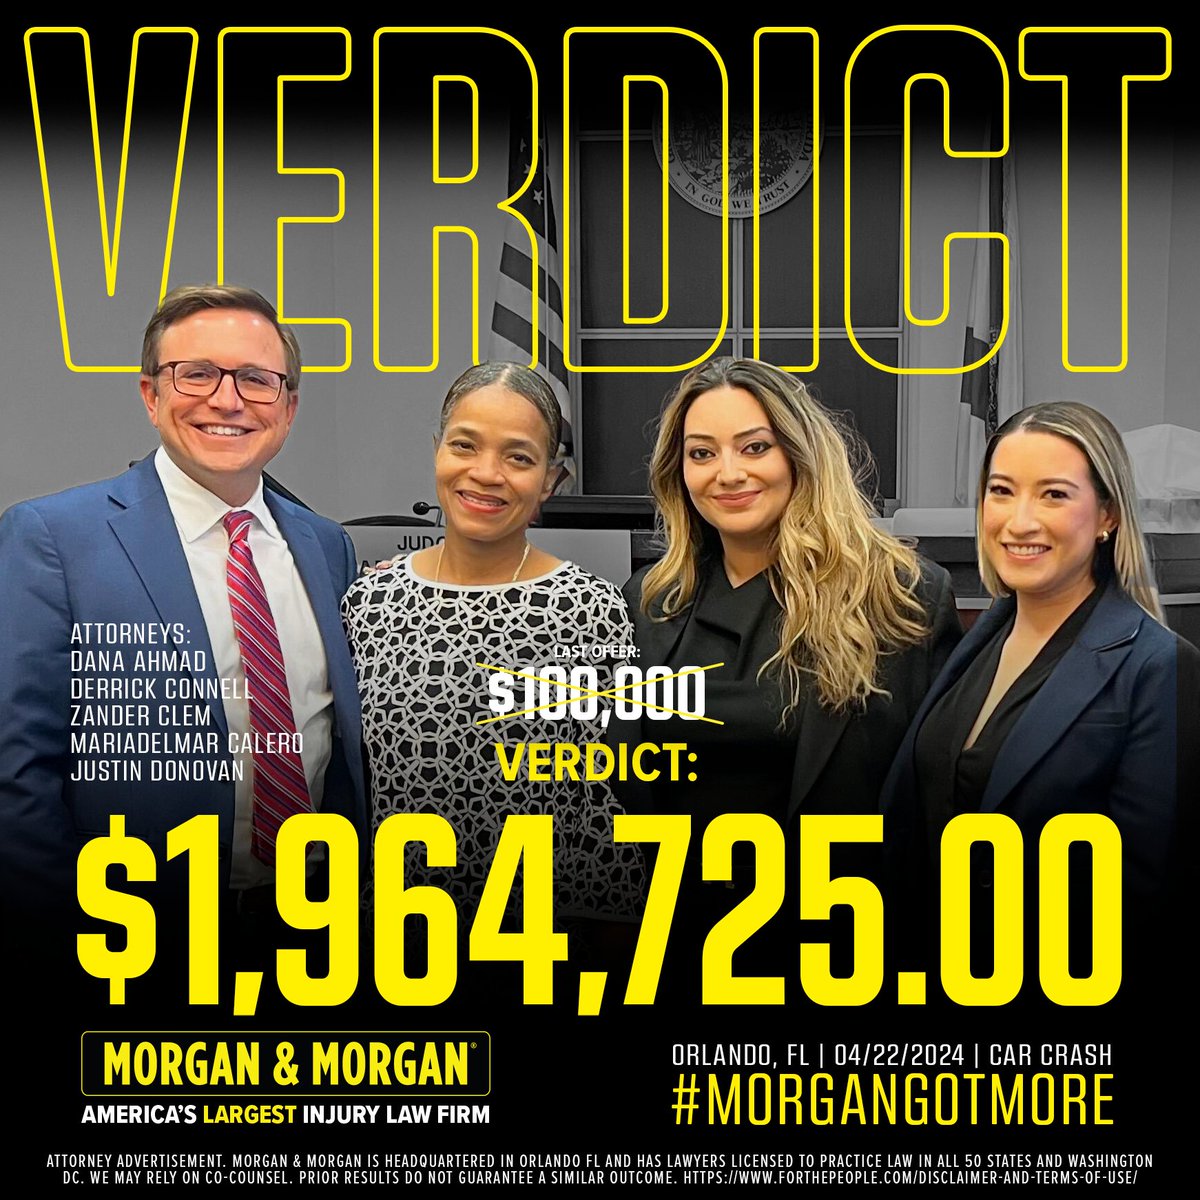 🚨 #VerdictAlert:

Dana Ahmad, Derrick Connell, Zander Clem, Mariadelmar Calero and Justin Donovan just received a $1,964,725.00 verdict for our client in Orlando!

That’s 19x the last offer from big insurance 💪 #ForThePeople #MorganGotMore